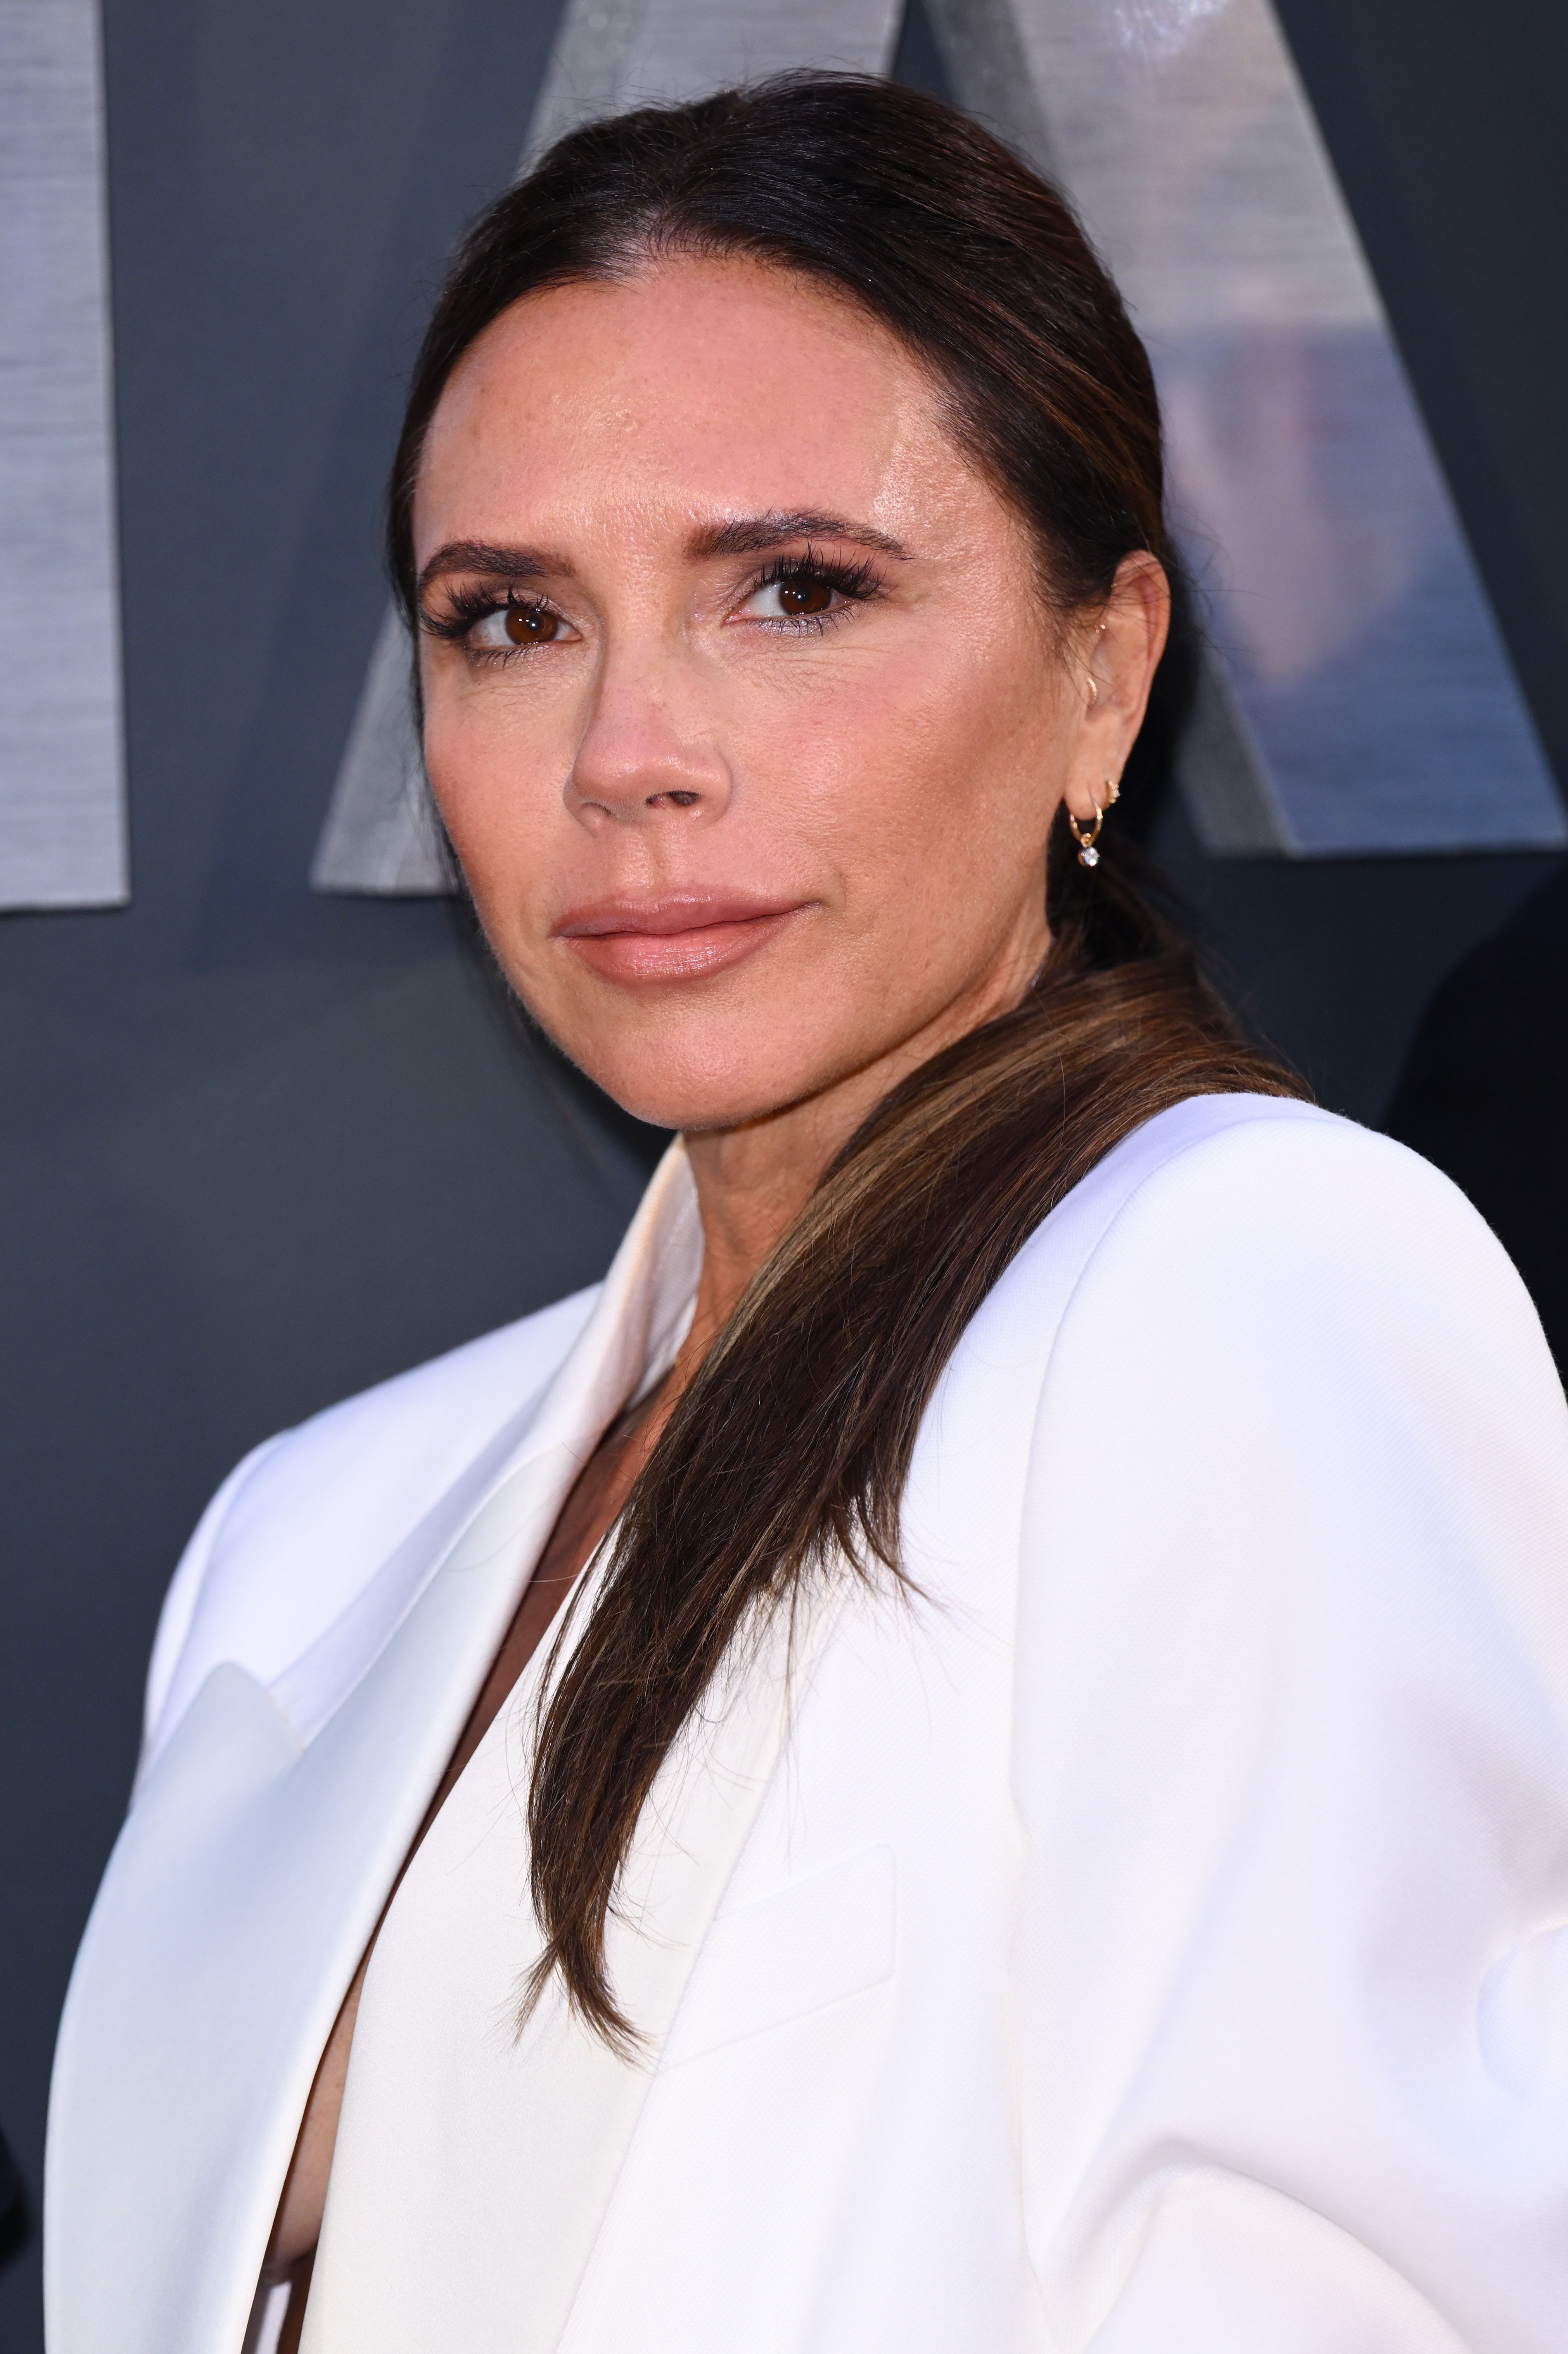 Here's the $15 Hand Cream Victoria Beckham Wears Morning and Night